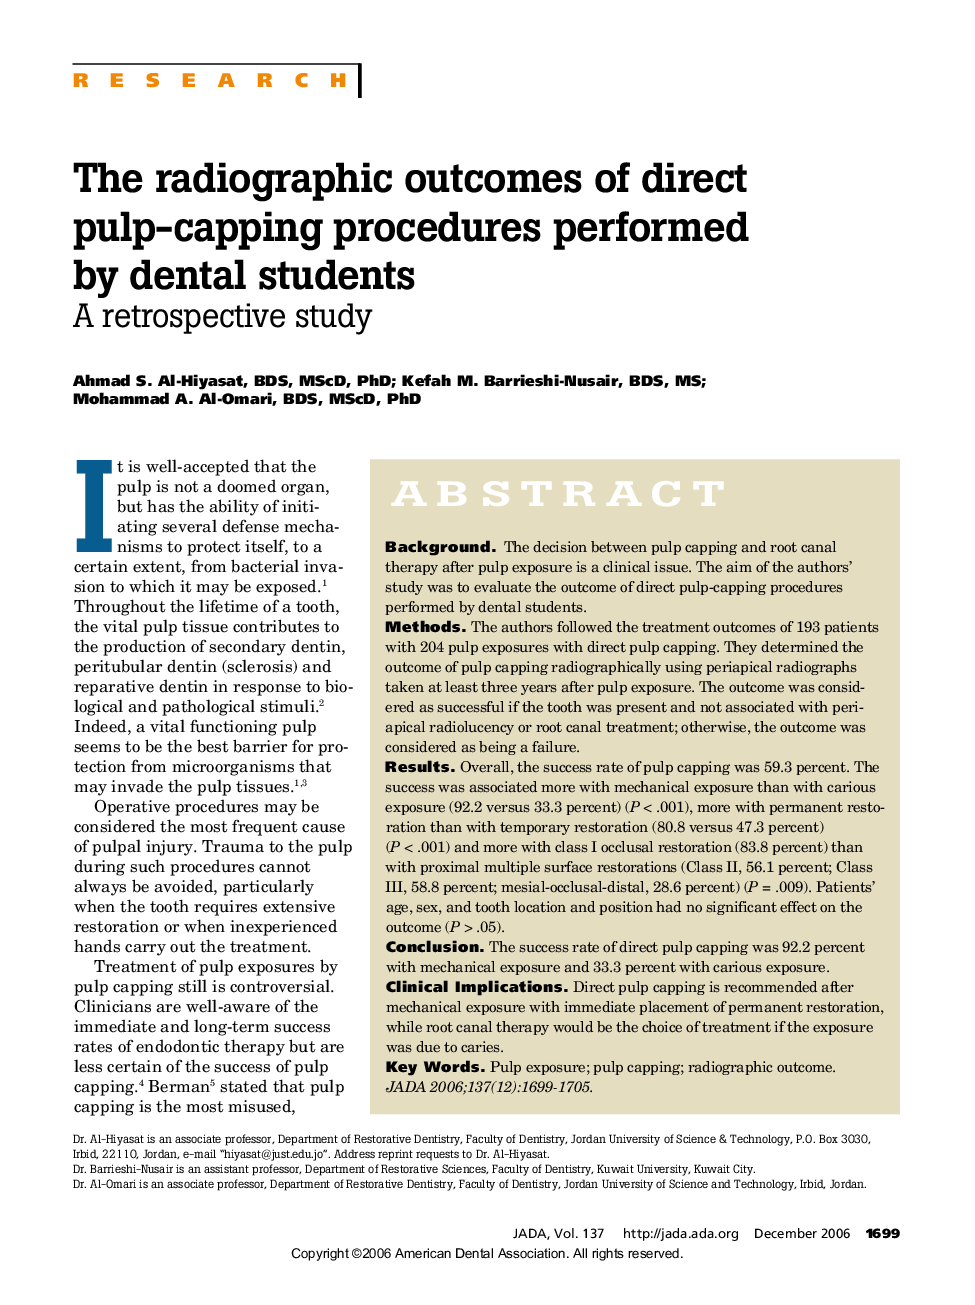 The radiographic outcomes of direct pulp-capping procedures performed by dental students: A retrospective study